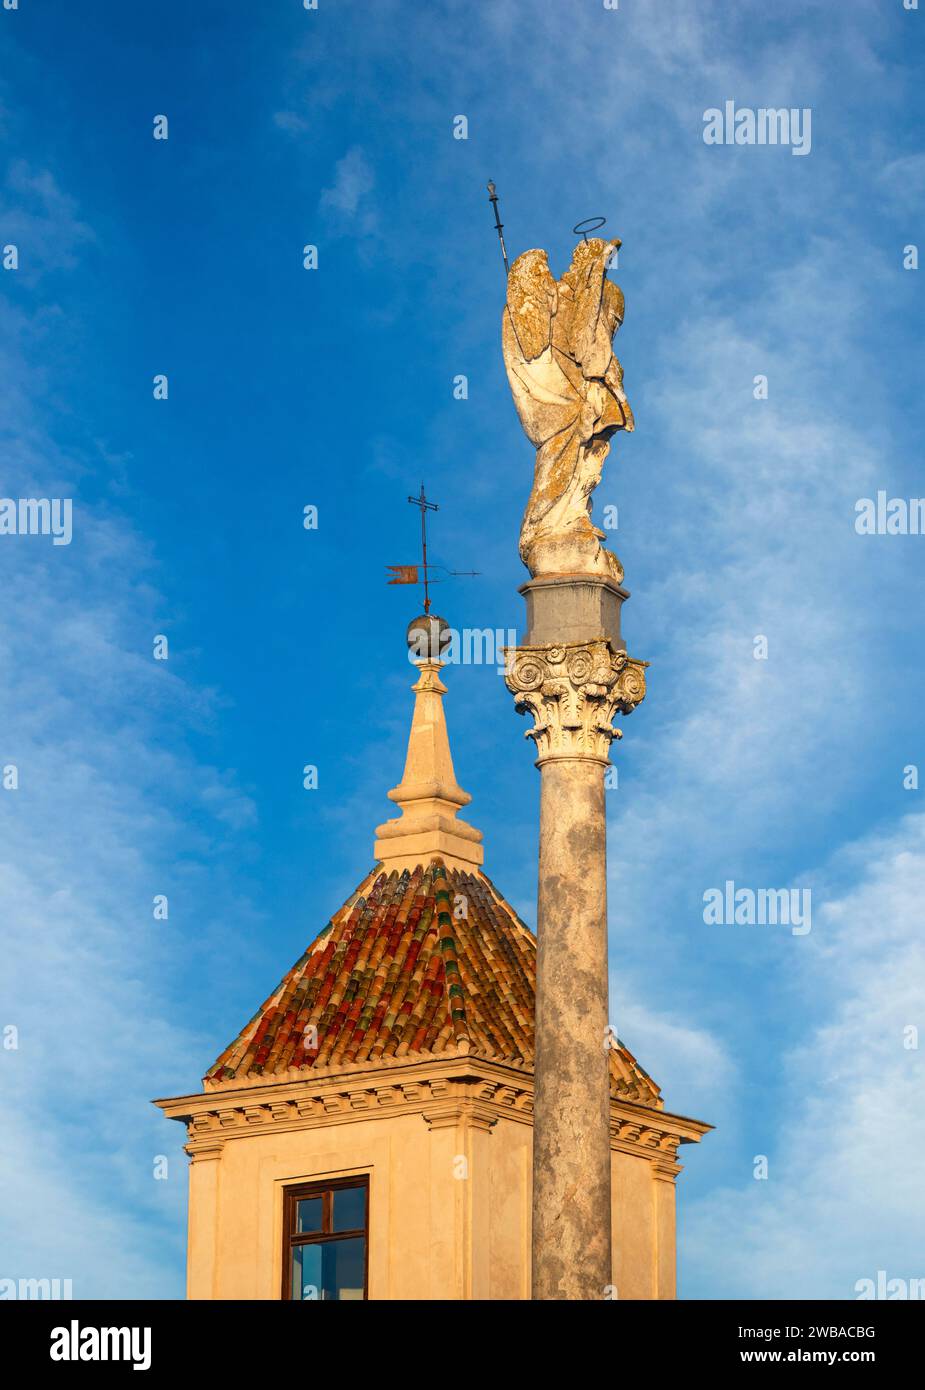 Sculpture of the Triumph of San Rafael de la Puerta del Puente with the tower of the bishopric of Córdoba, Andalusia, Spain, in the background Stock Photo